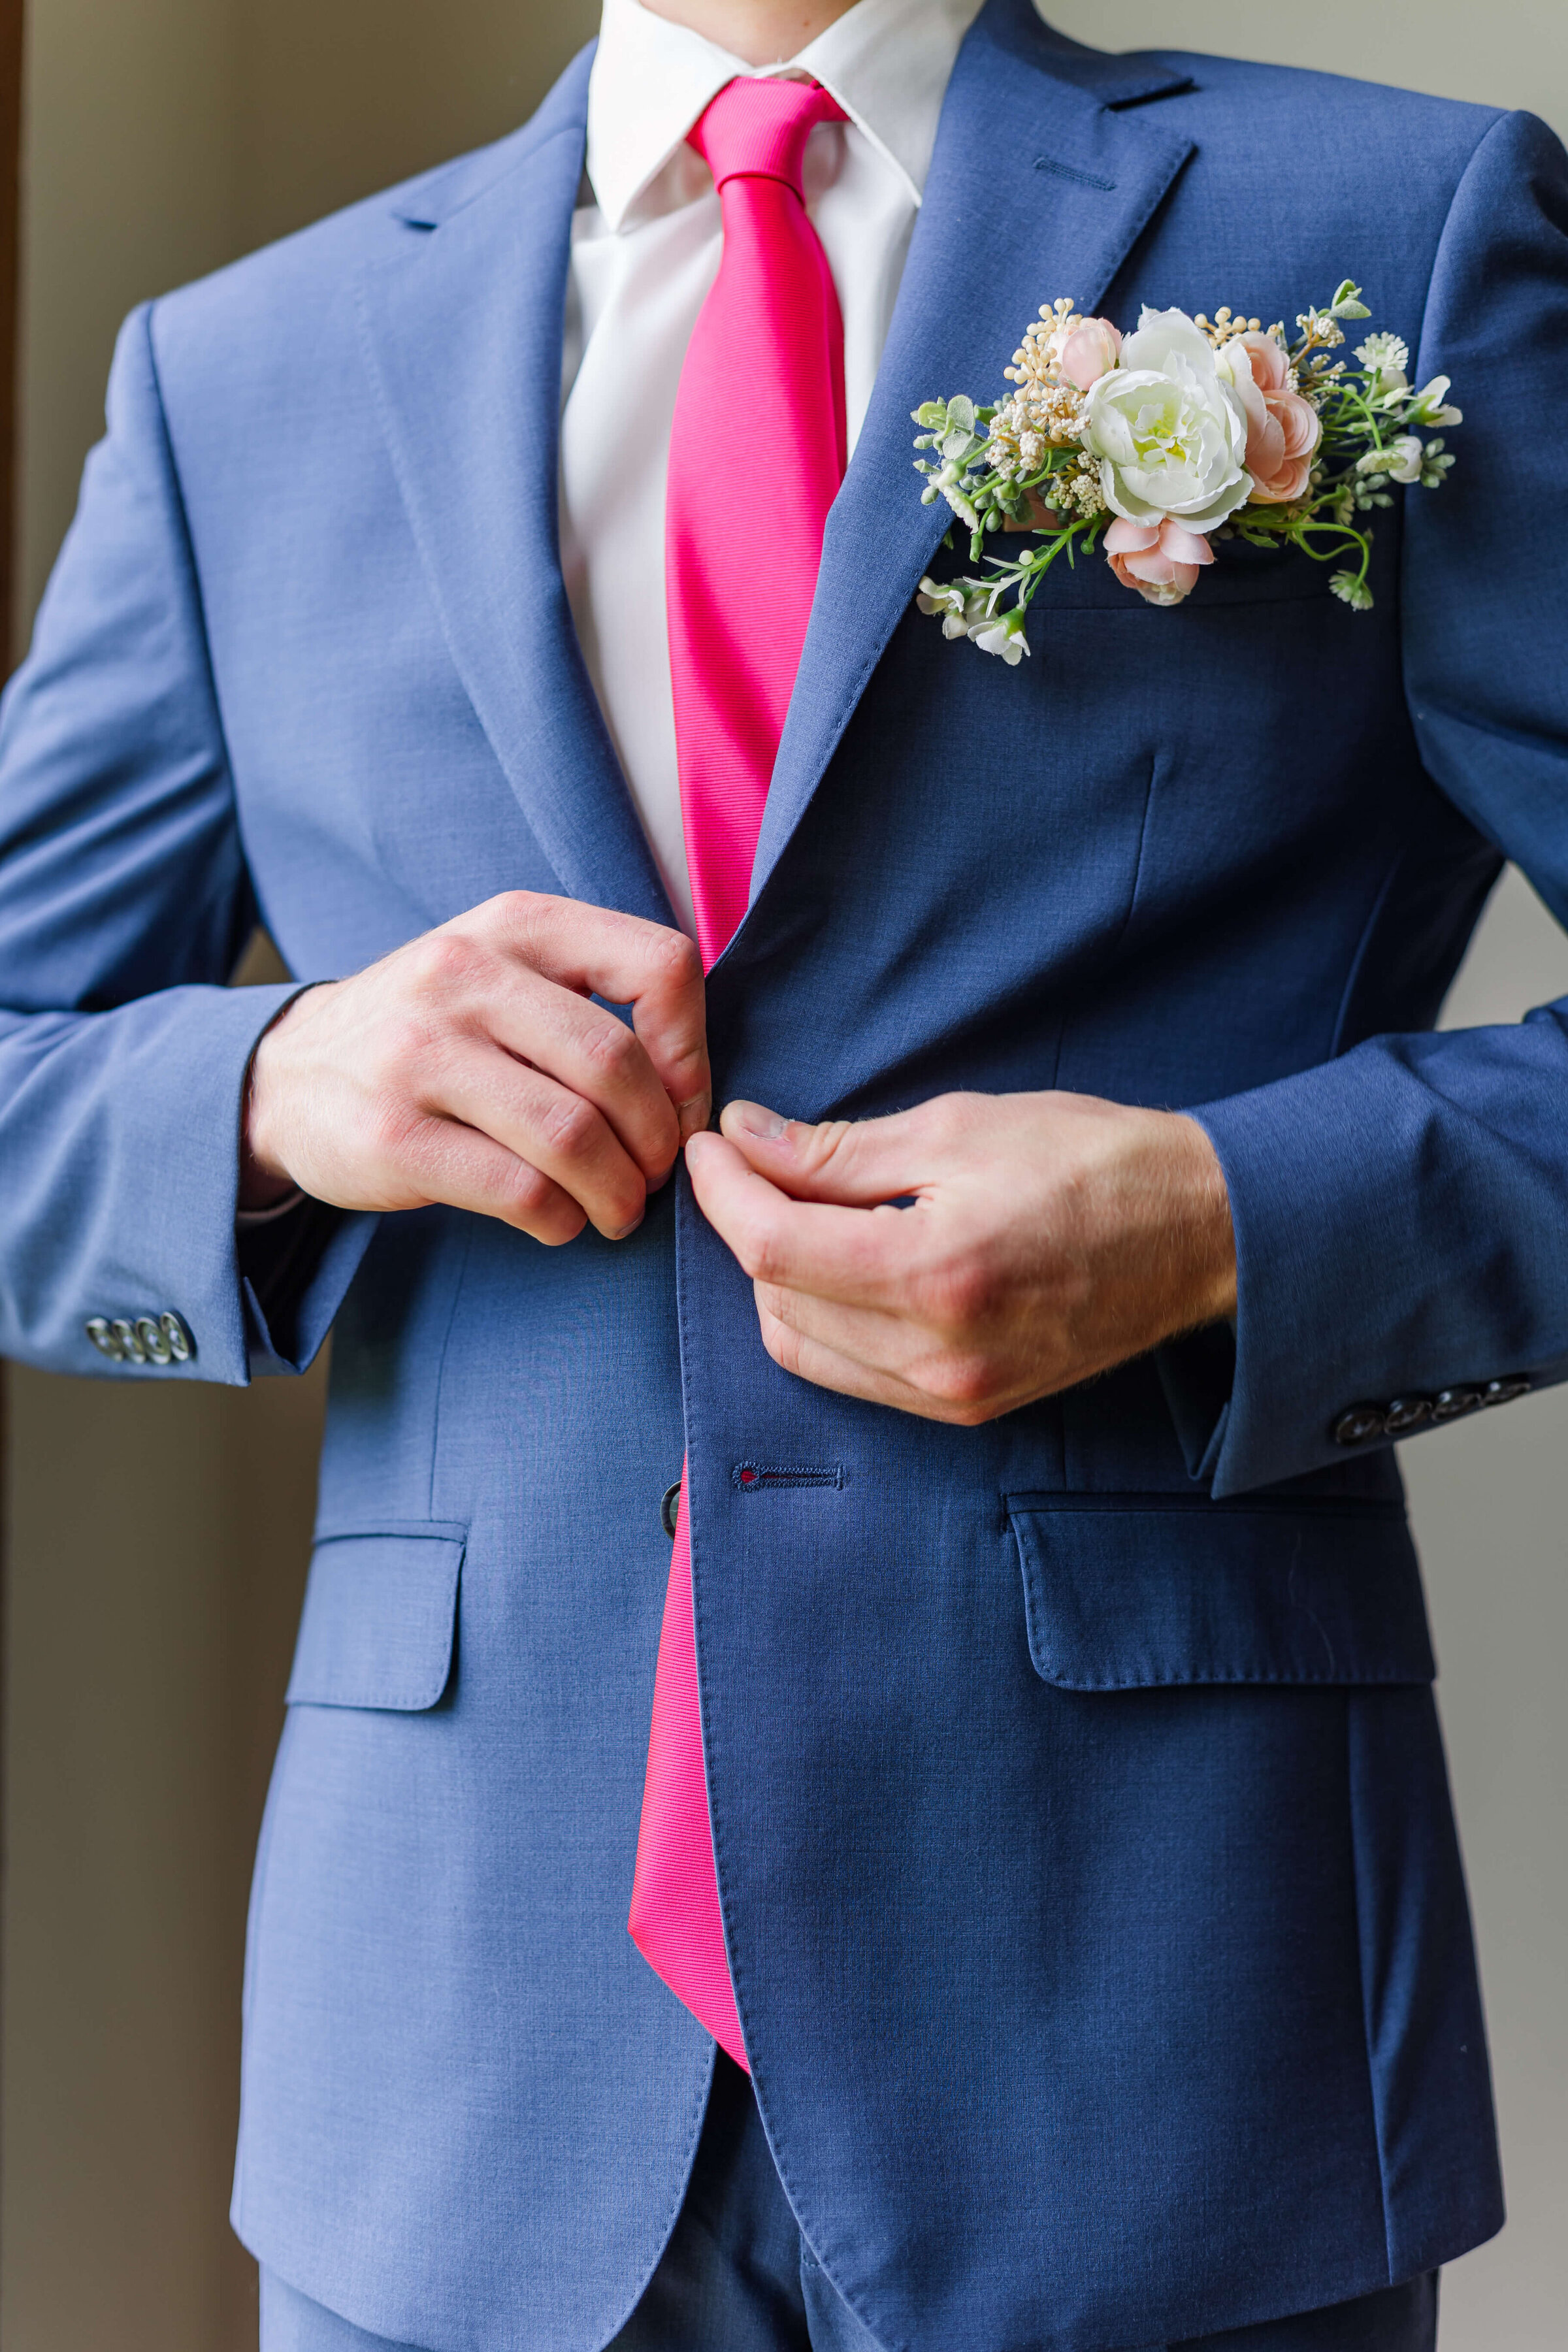 A groom in a blue suit buttons his jacket - this is a cropped image of just his suit jacket.